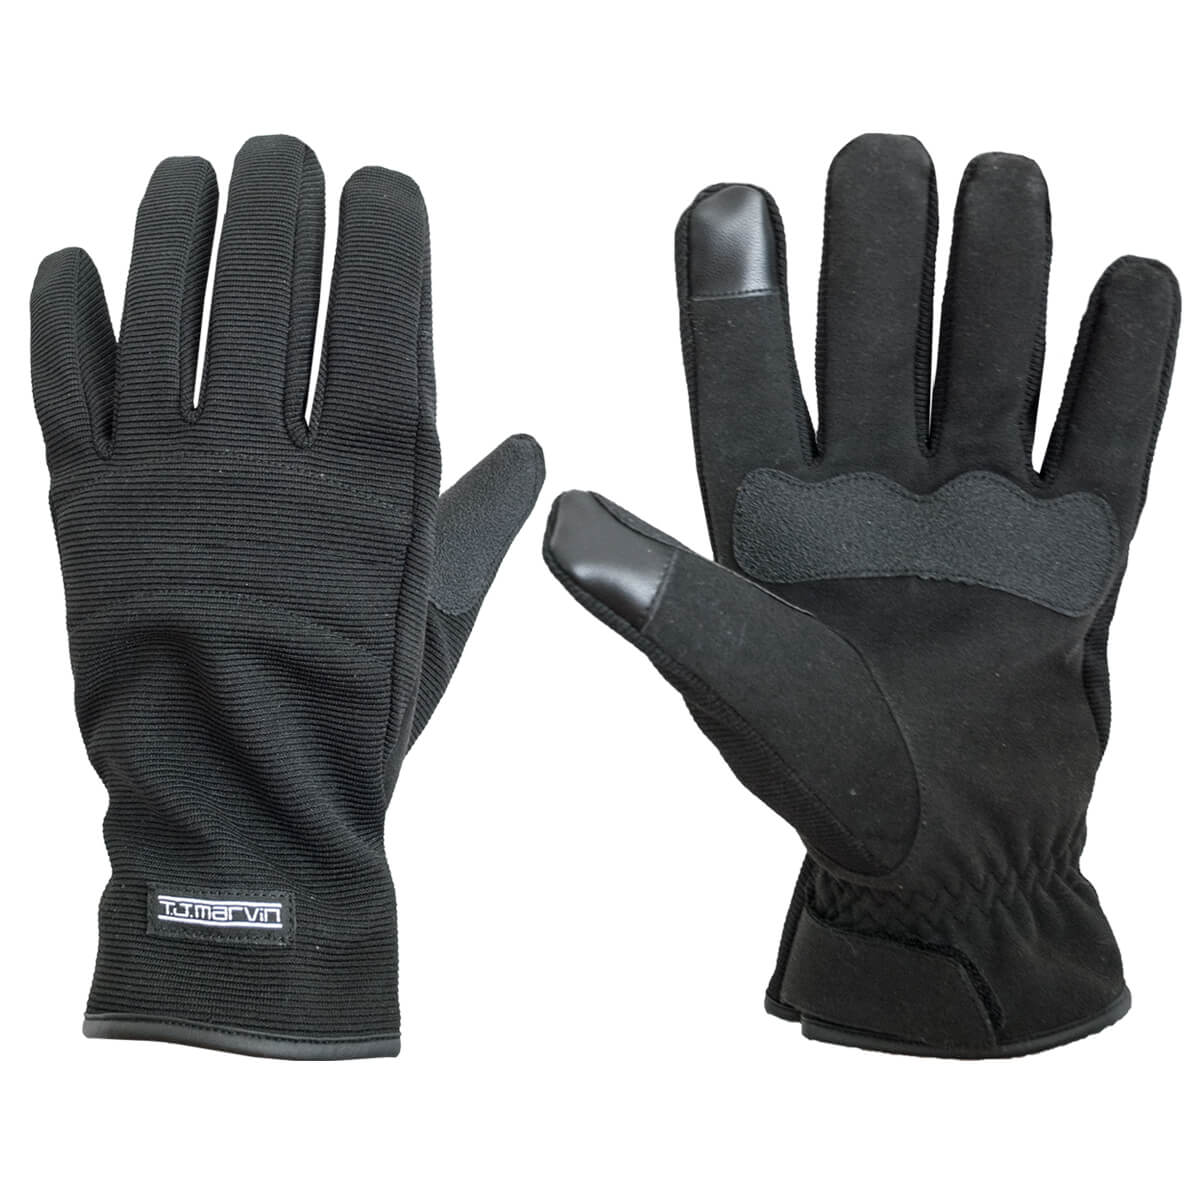 Touch-Screen Compatible Waterproof and Windproof Gloves Comfort Model